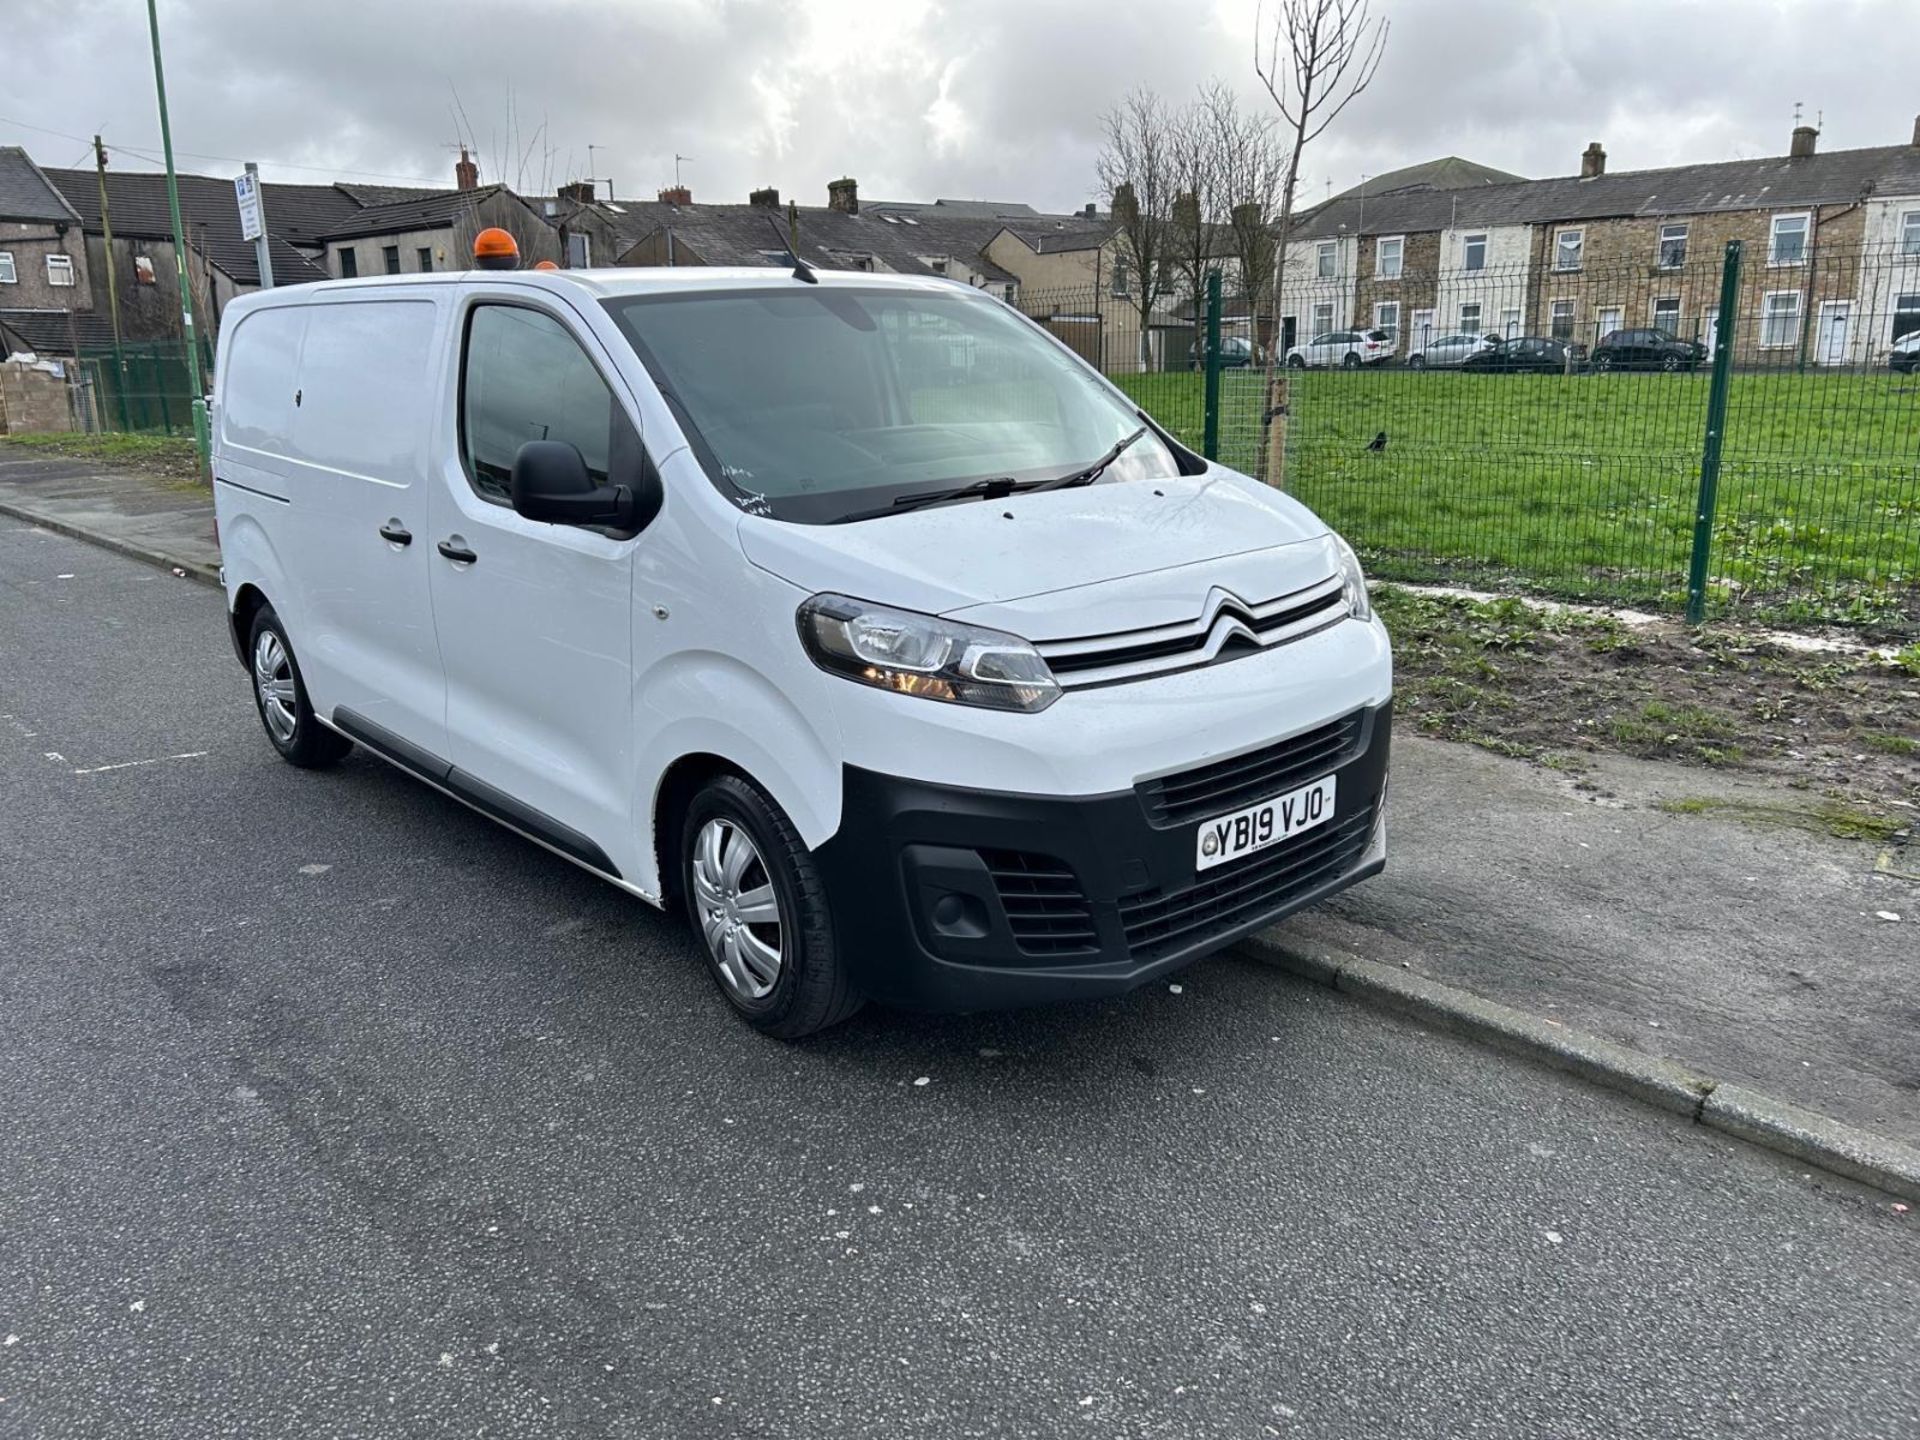 2019 CITROEN DISPATCH - 124K MILES - HPI CLEAR - READY TO GO ! - Image 2 of 12